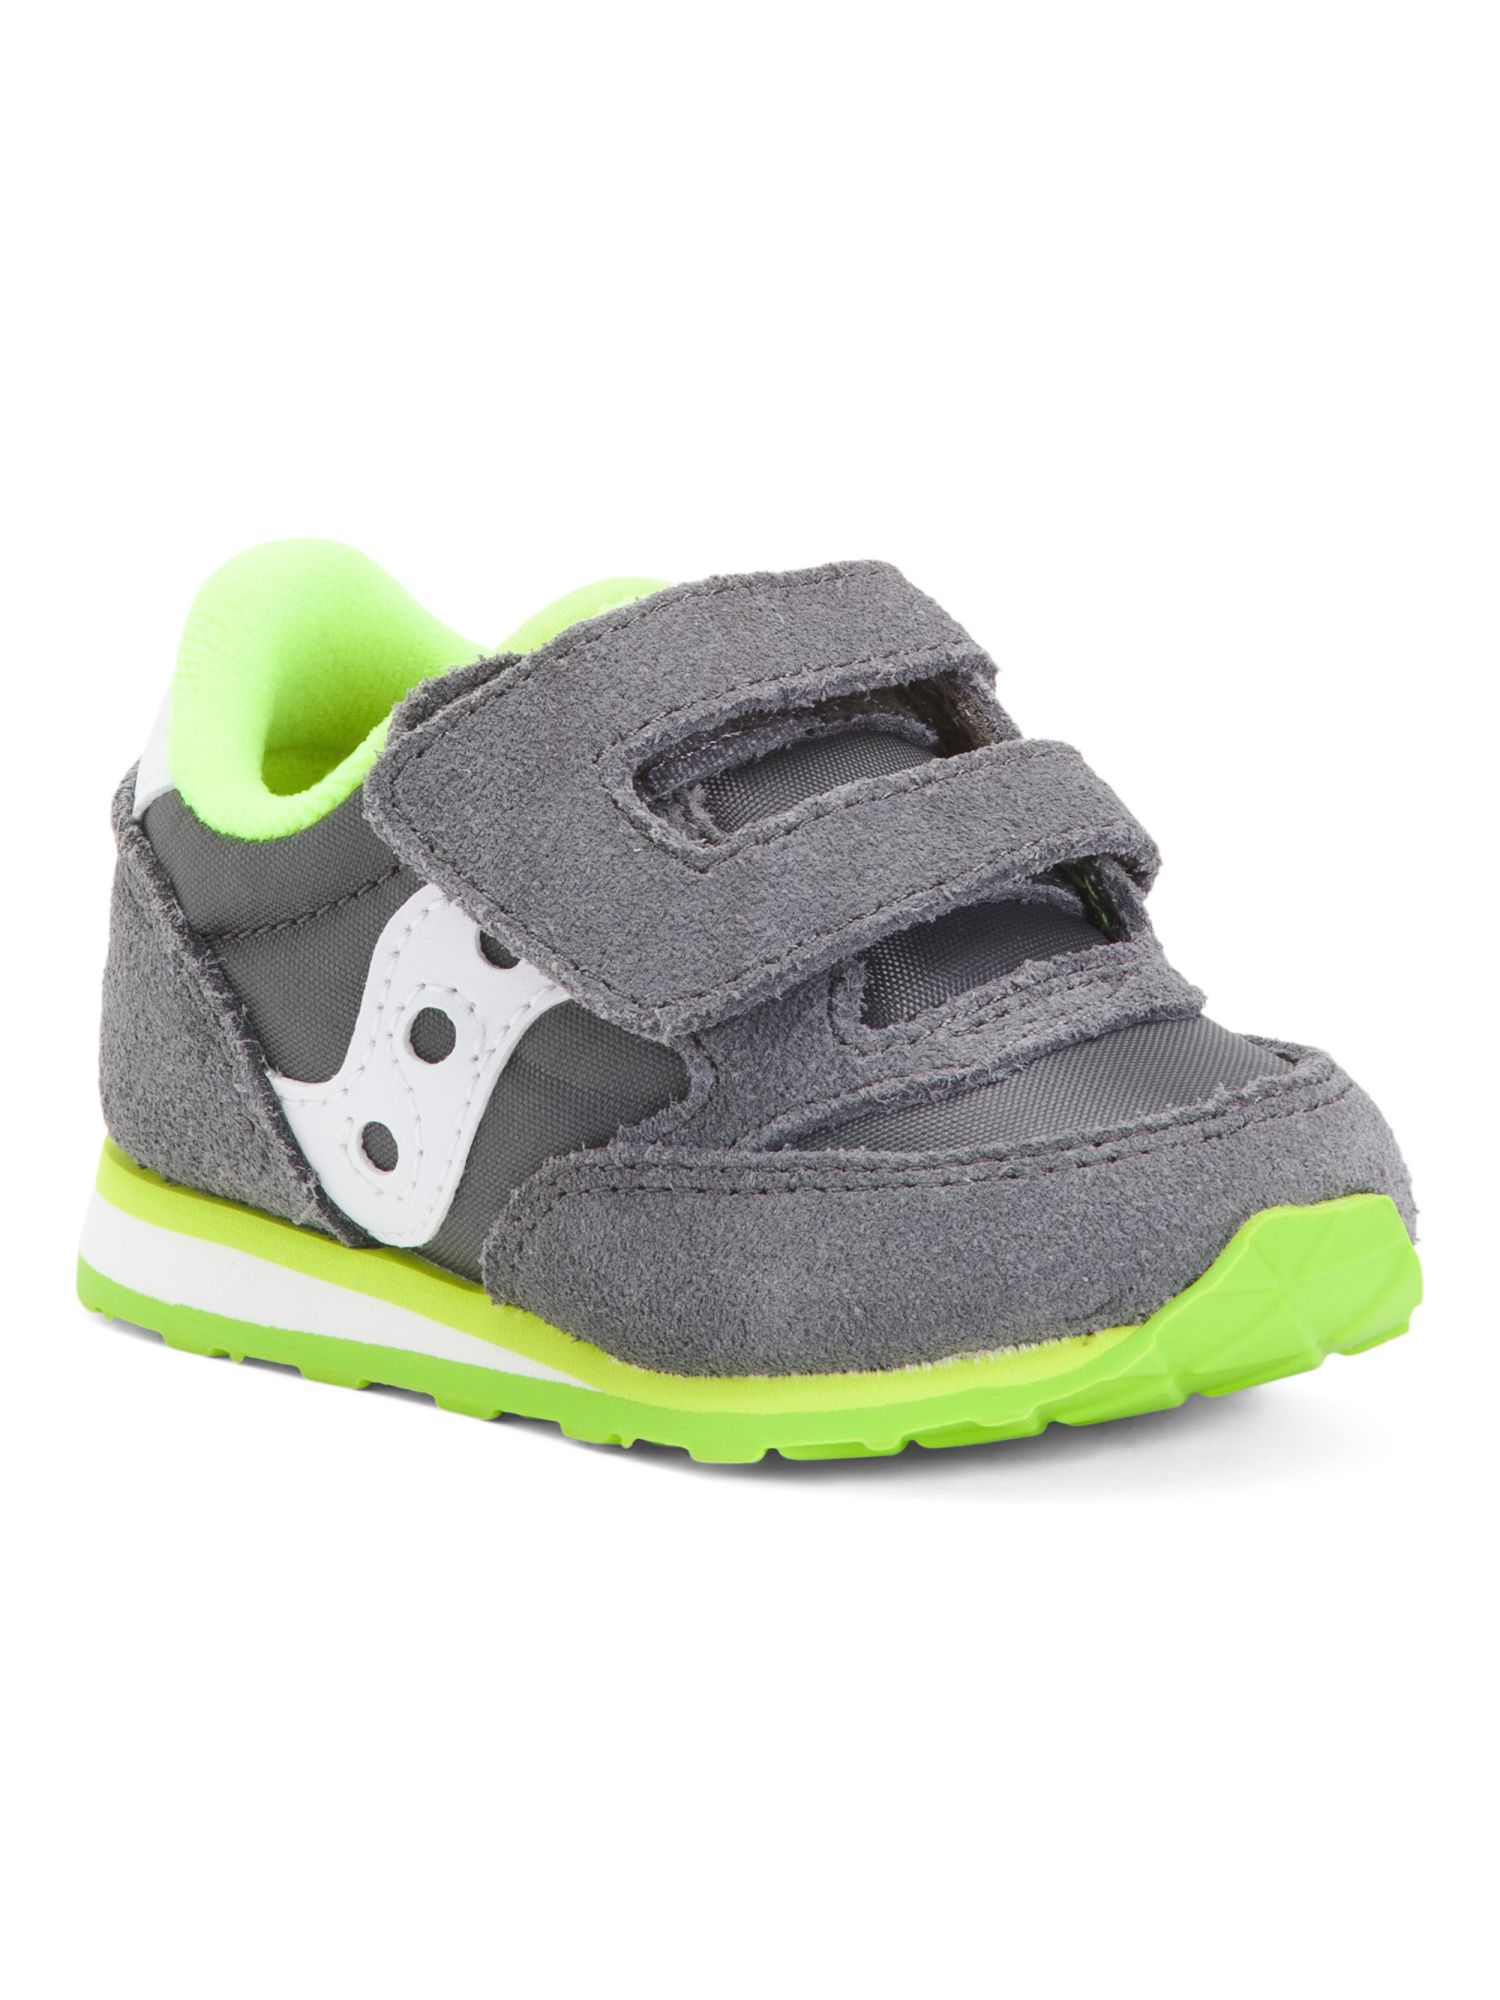 Suede Baby Jazz Sneakers (Infant, Toddler) | Marshalls